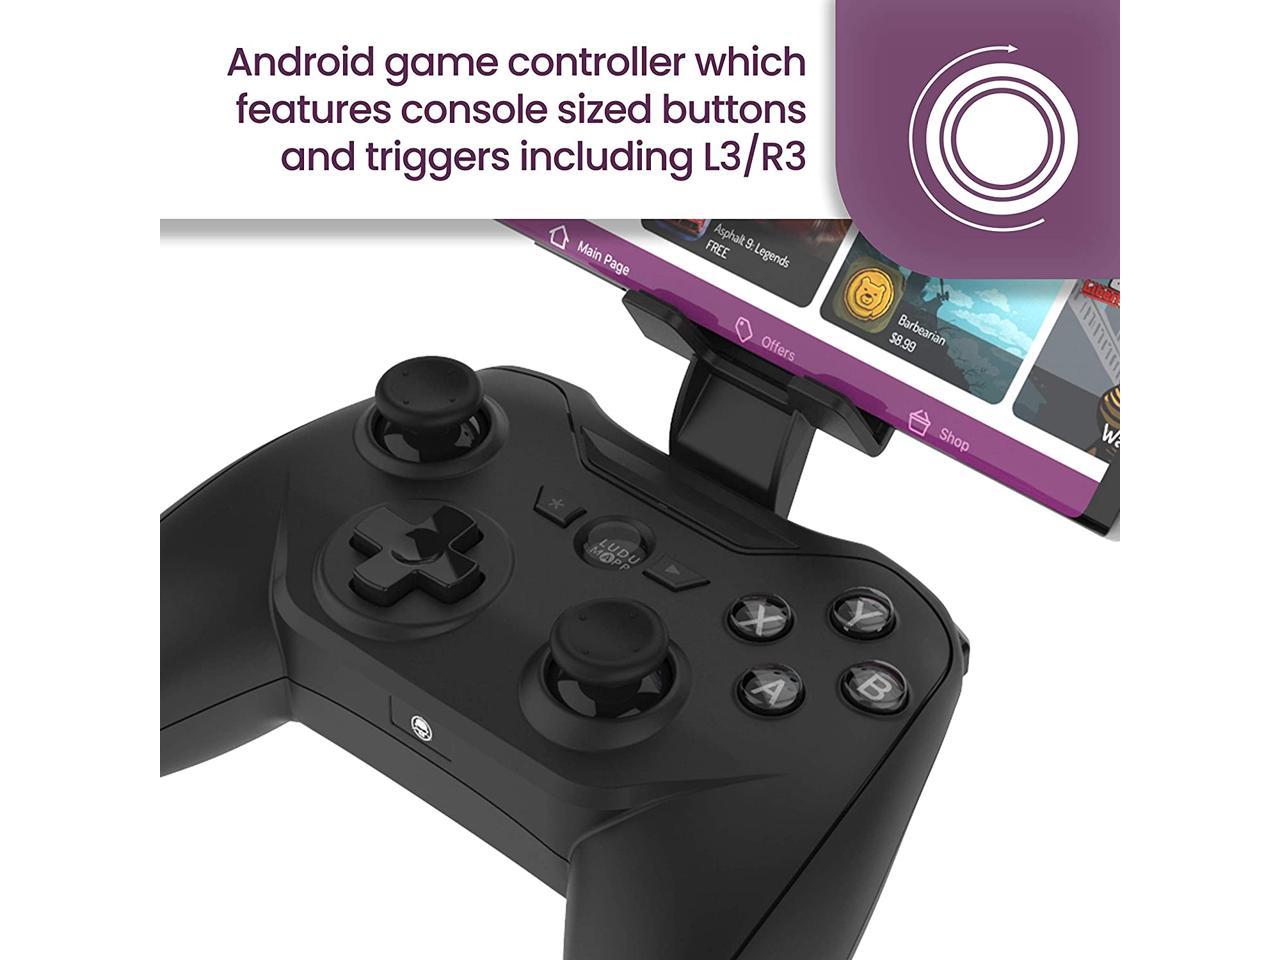 Begraafplaats Ontwaken Gelijkwaardig Rotor Riot Mobile Gamepad Controller - Latency Free Wired Controller with L3  + R3, Improved 8 Way D-Pad, Highly Compatible Gaming Device Holder for  Android - Newegg.com